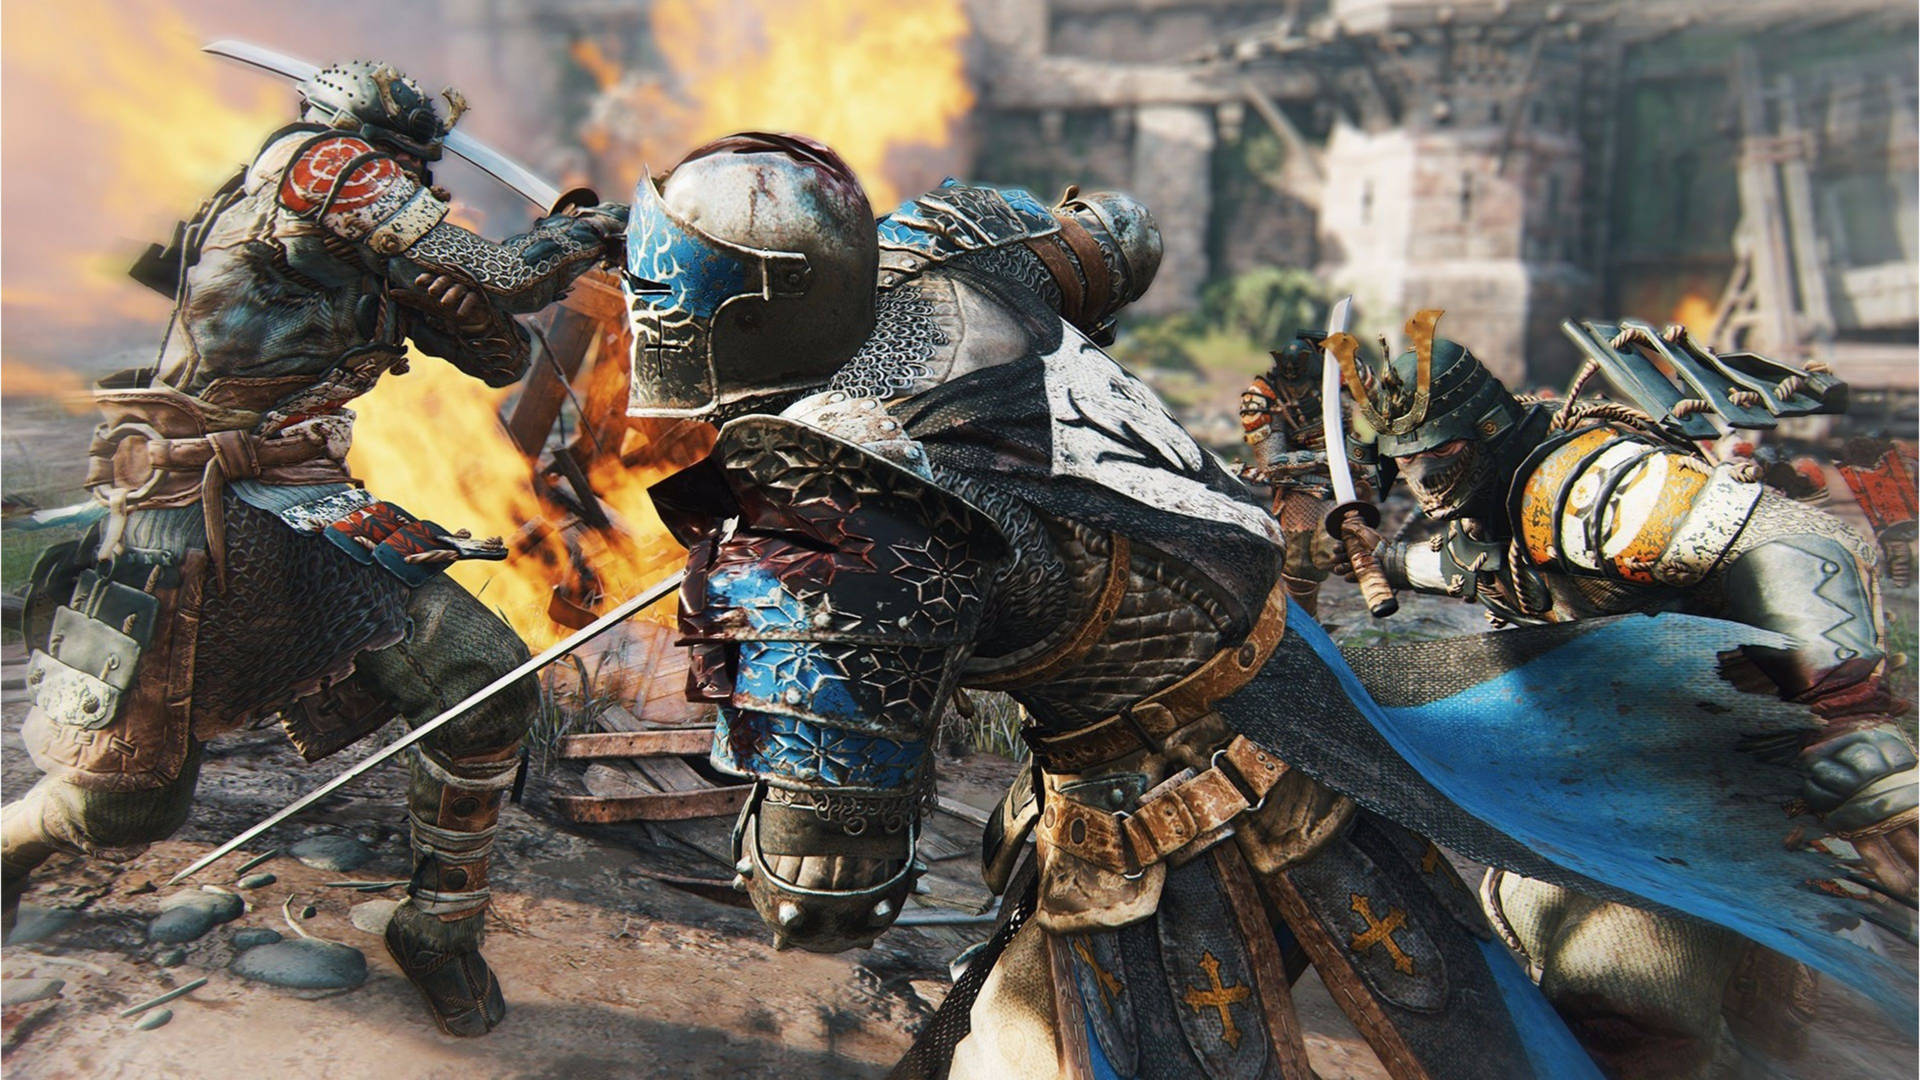 Warriors clash in an epic For Honor sword fight Wallpaper